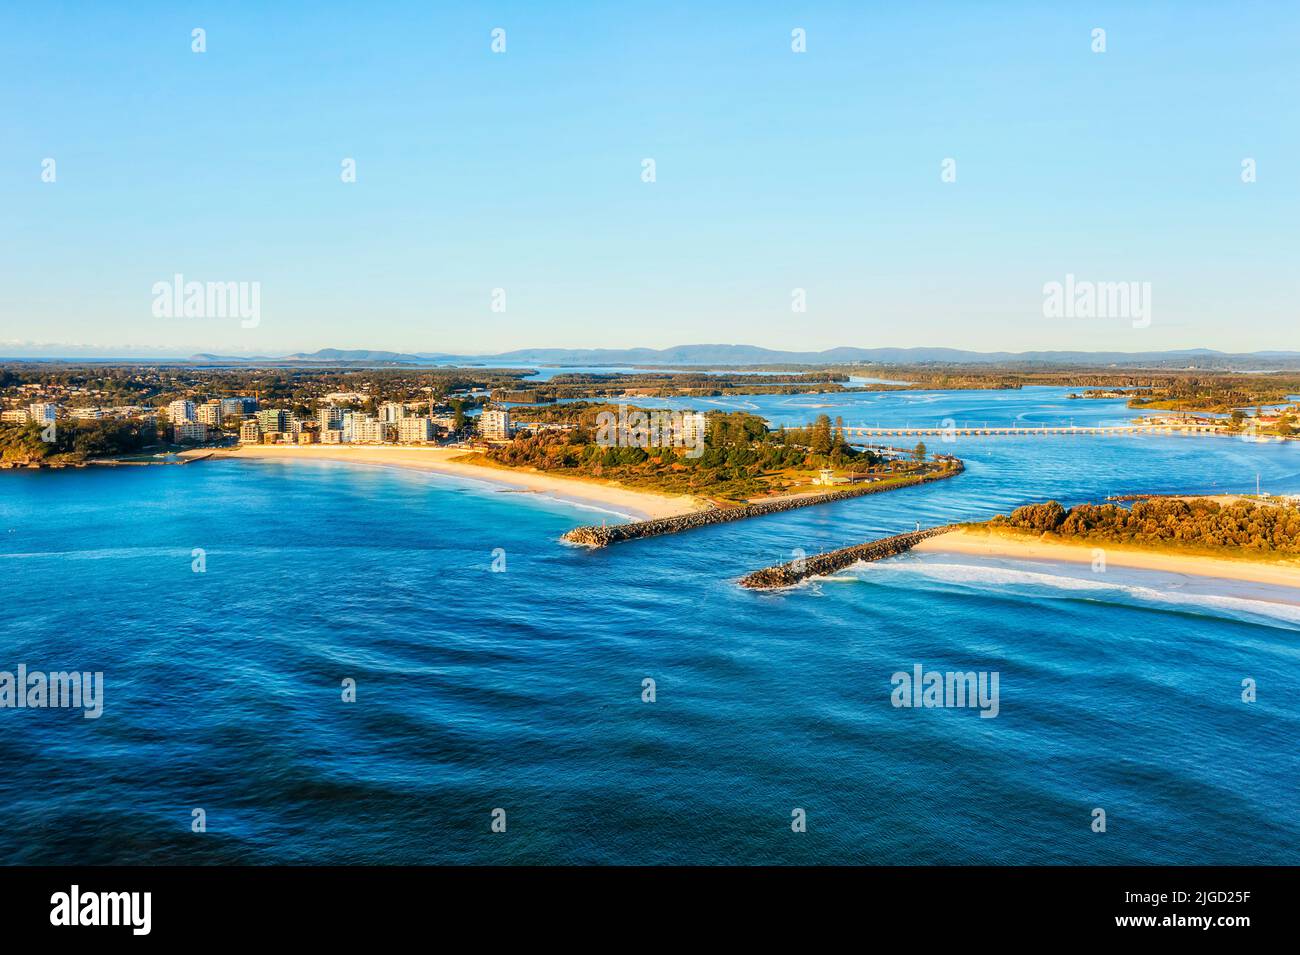 Waterfront of Forster Tuncurry double town settlement on Wallis lake at the delta of Coolongolook river entering Pacific ocean in Australia - aerial l Stock Photo